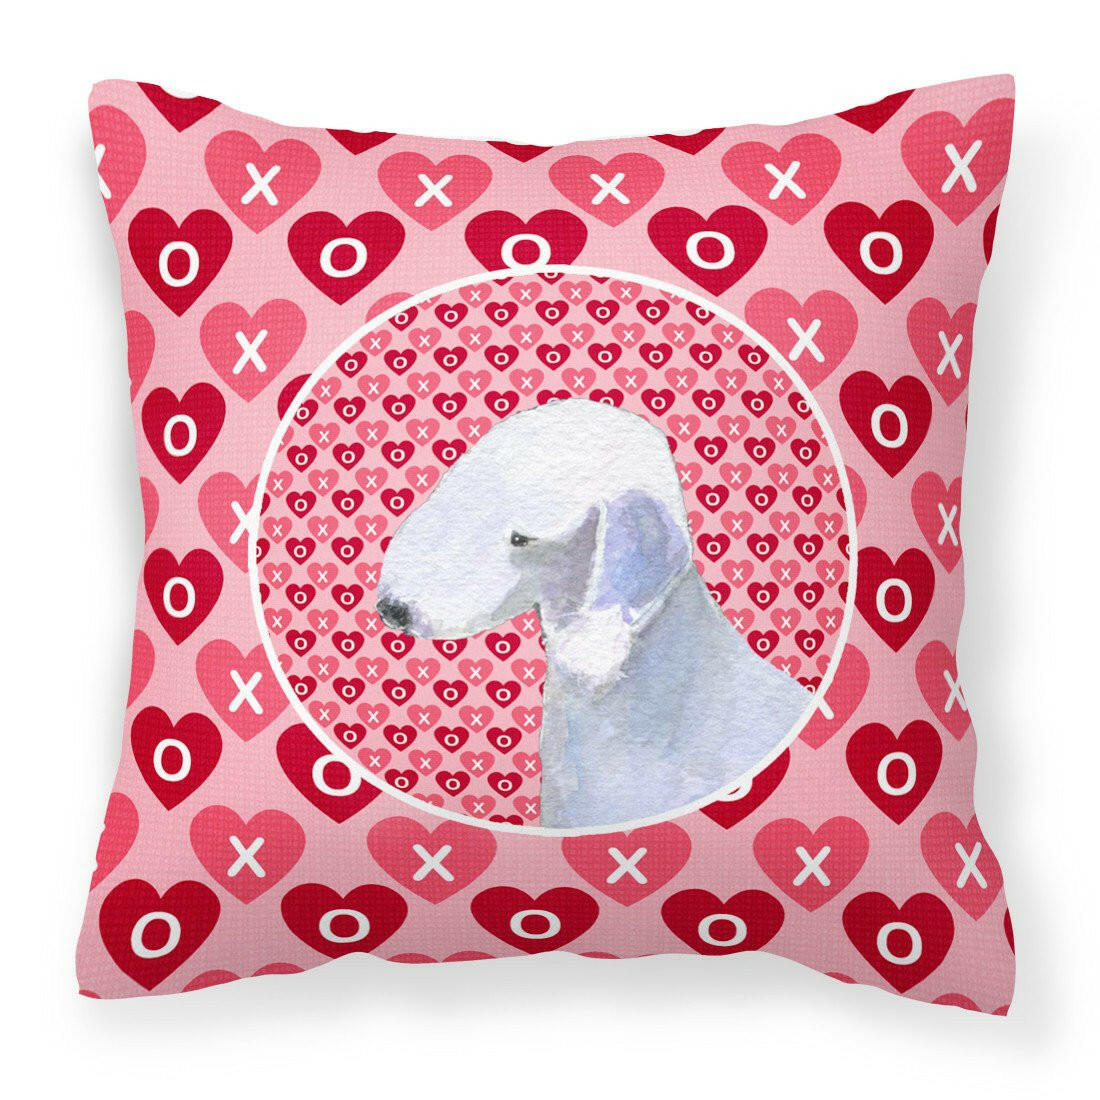 Bedlington Terrier Hearts Love and Valentine's Day Portrait Fabric Decorative Pillow SS4483PW1414 by Caroline's Treasures